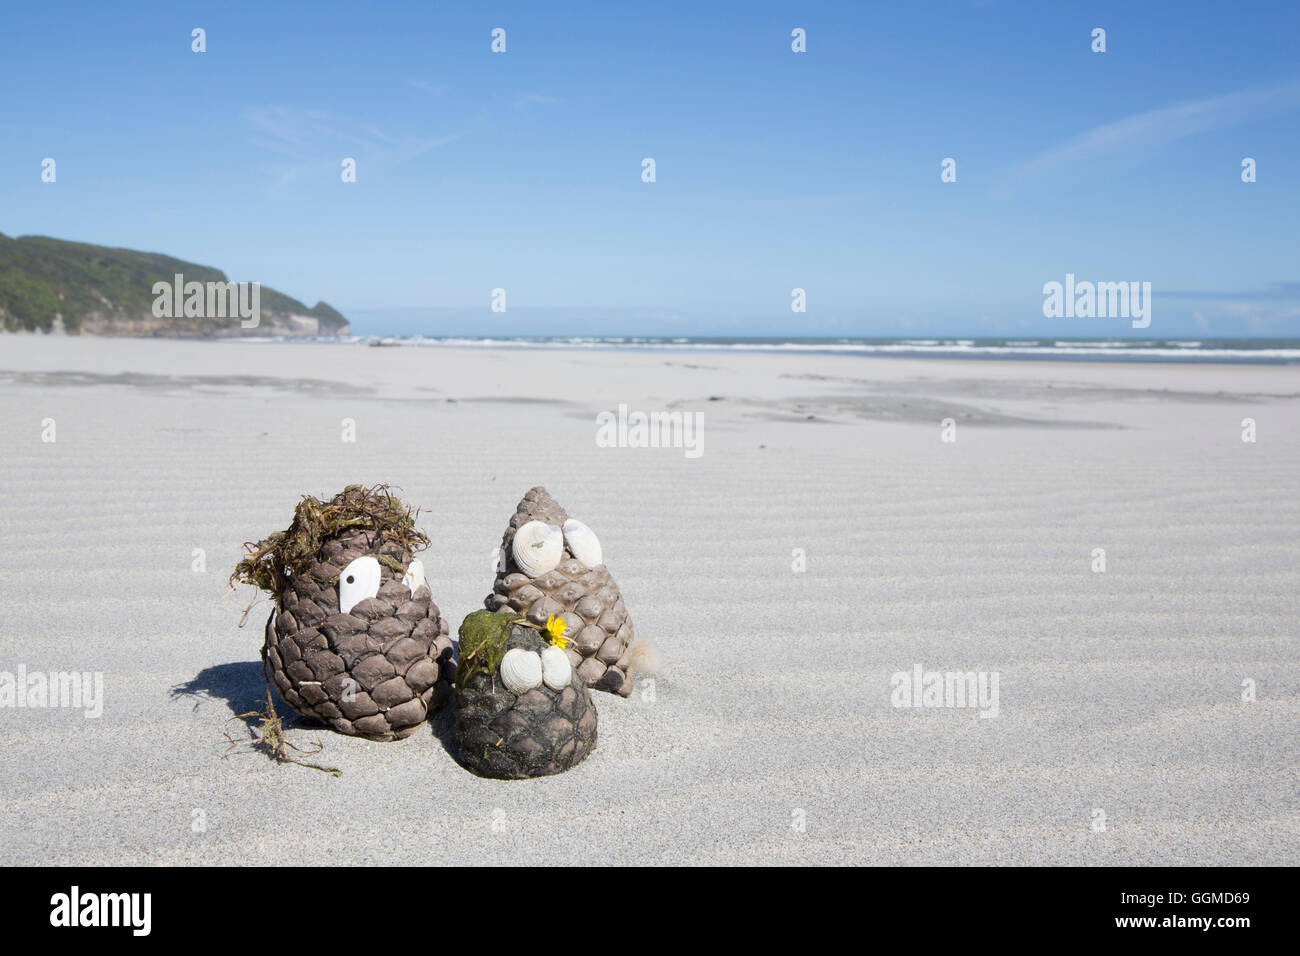 Creatures made out of pine cones on the beach, Farewell Spit, South Island, New Zealand Stock Photo